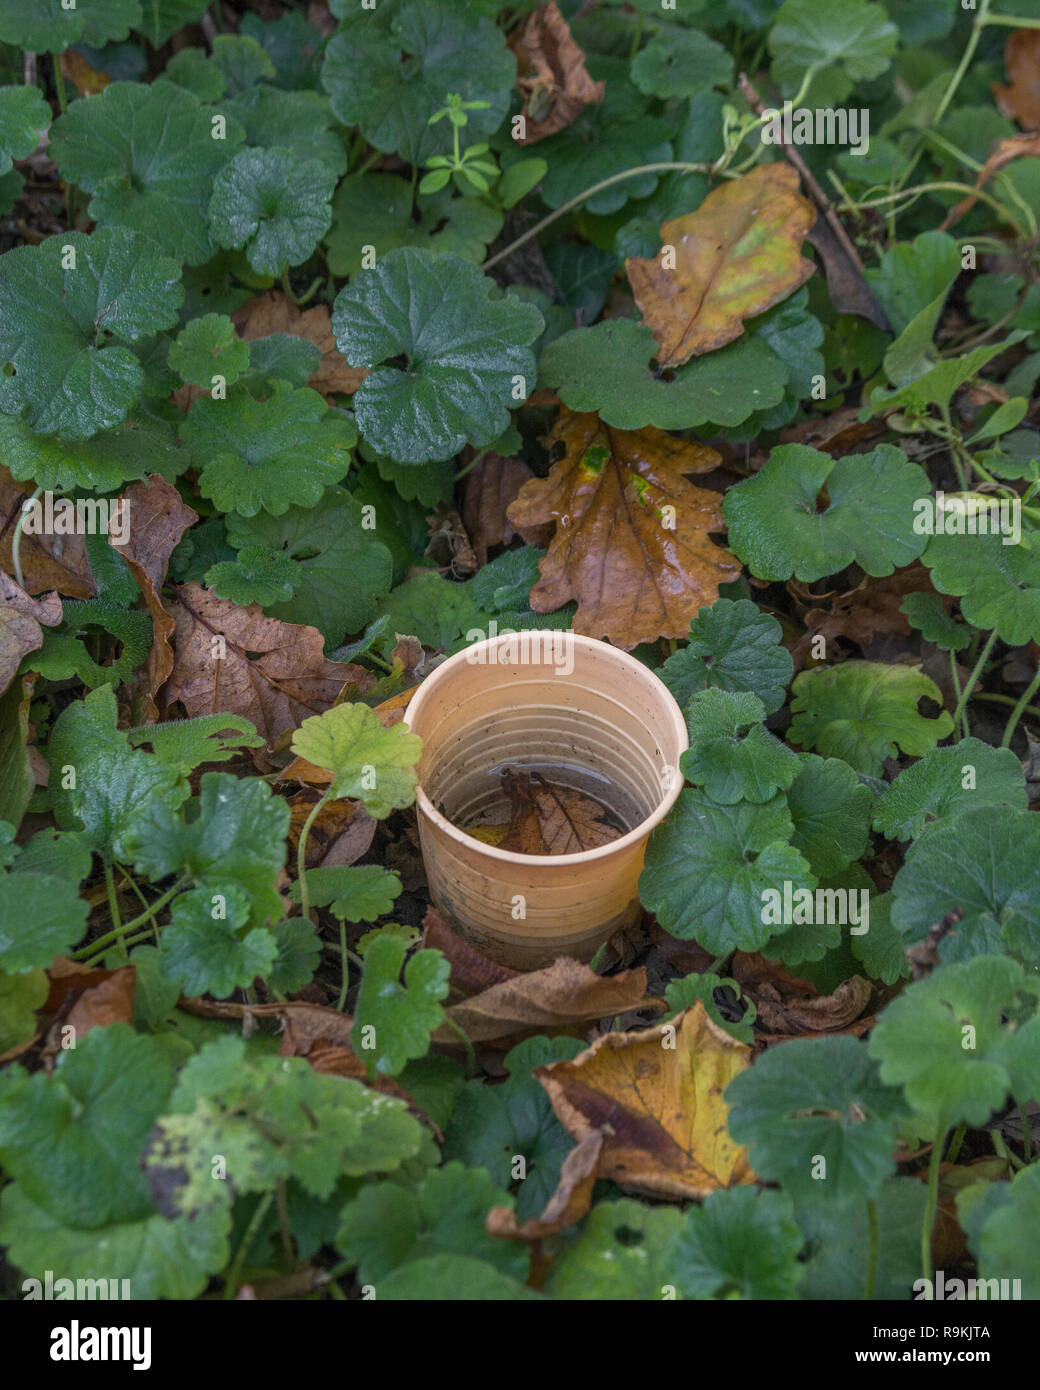 PTFE plastic takeaway coffee cup discarded in rural hedgerow. Metaphor plastic pollution, environmental pollution, war on plastic waste. Stock Photo